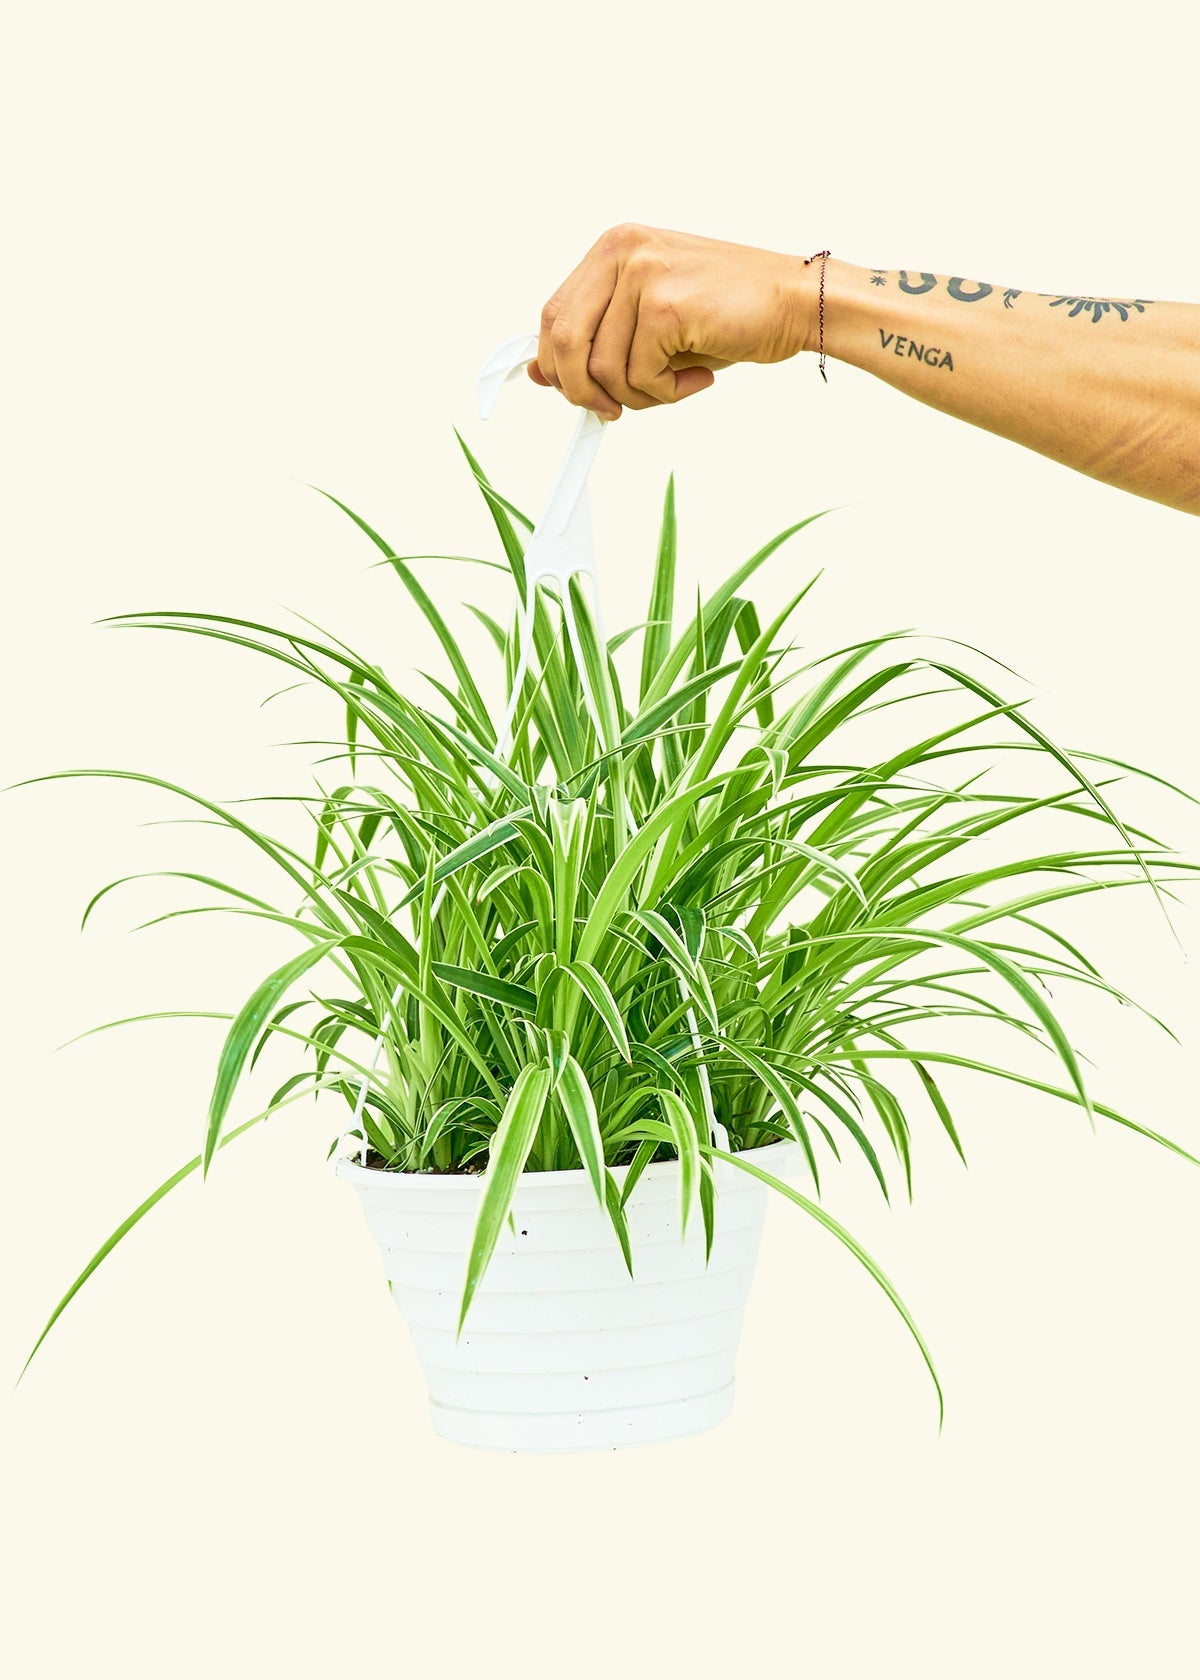 Pro Guide to Spider Plant Care - Spider Plant Growing Tips